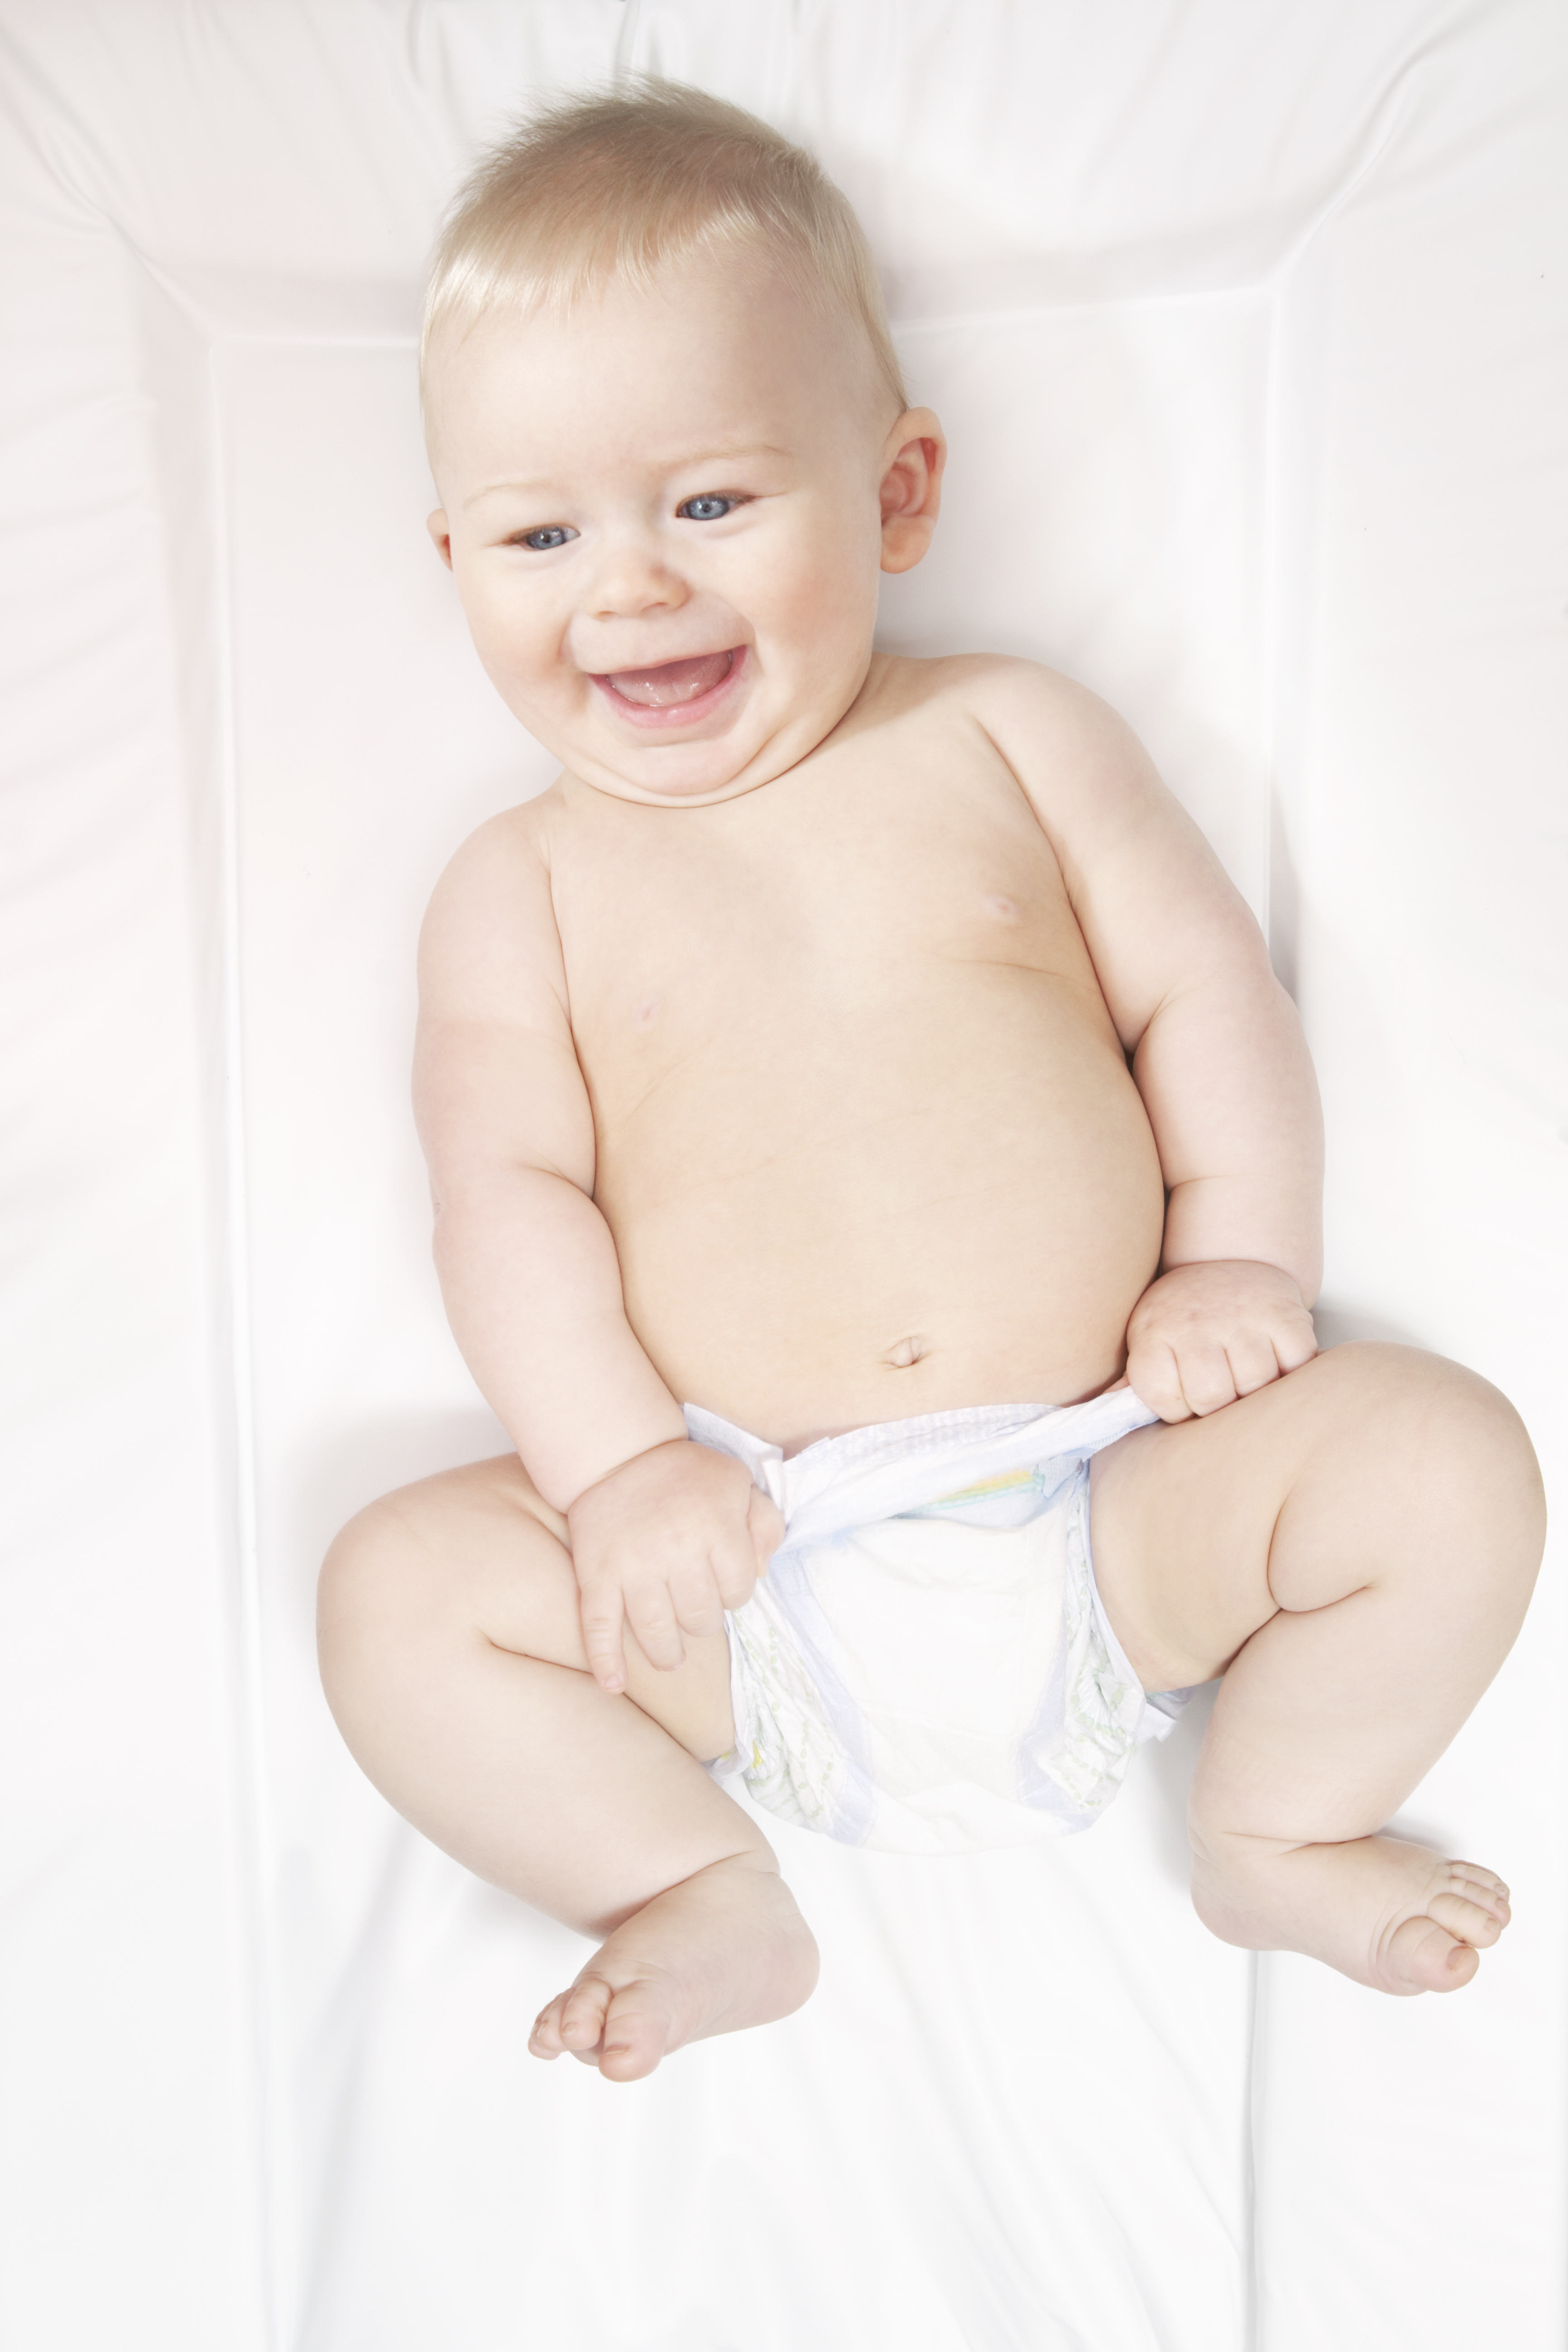 Baby in nappy on changing mat. (Lisa Stirling—Getty Images)